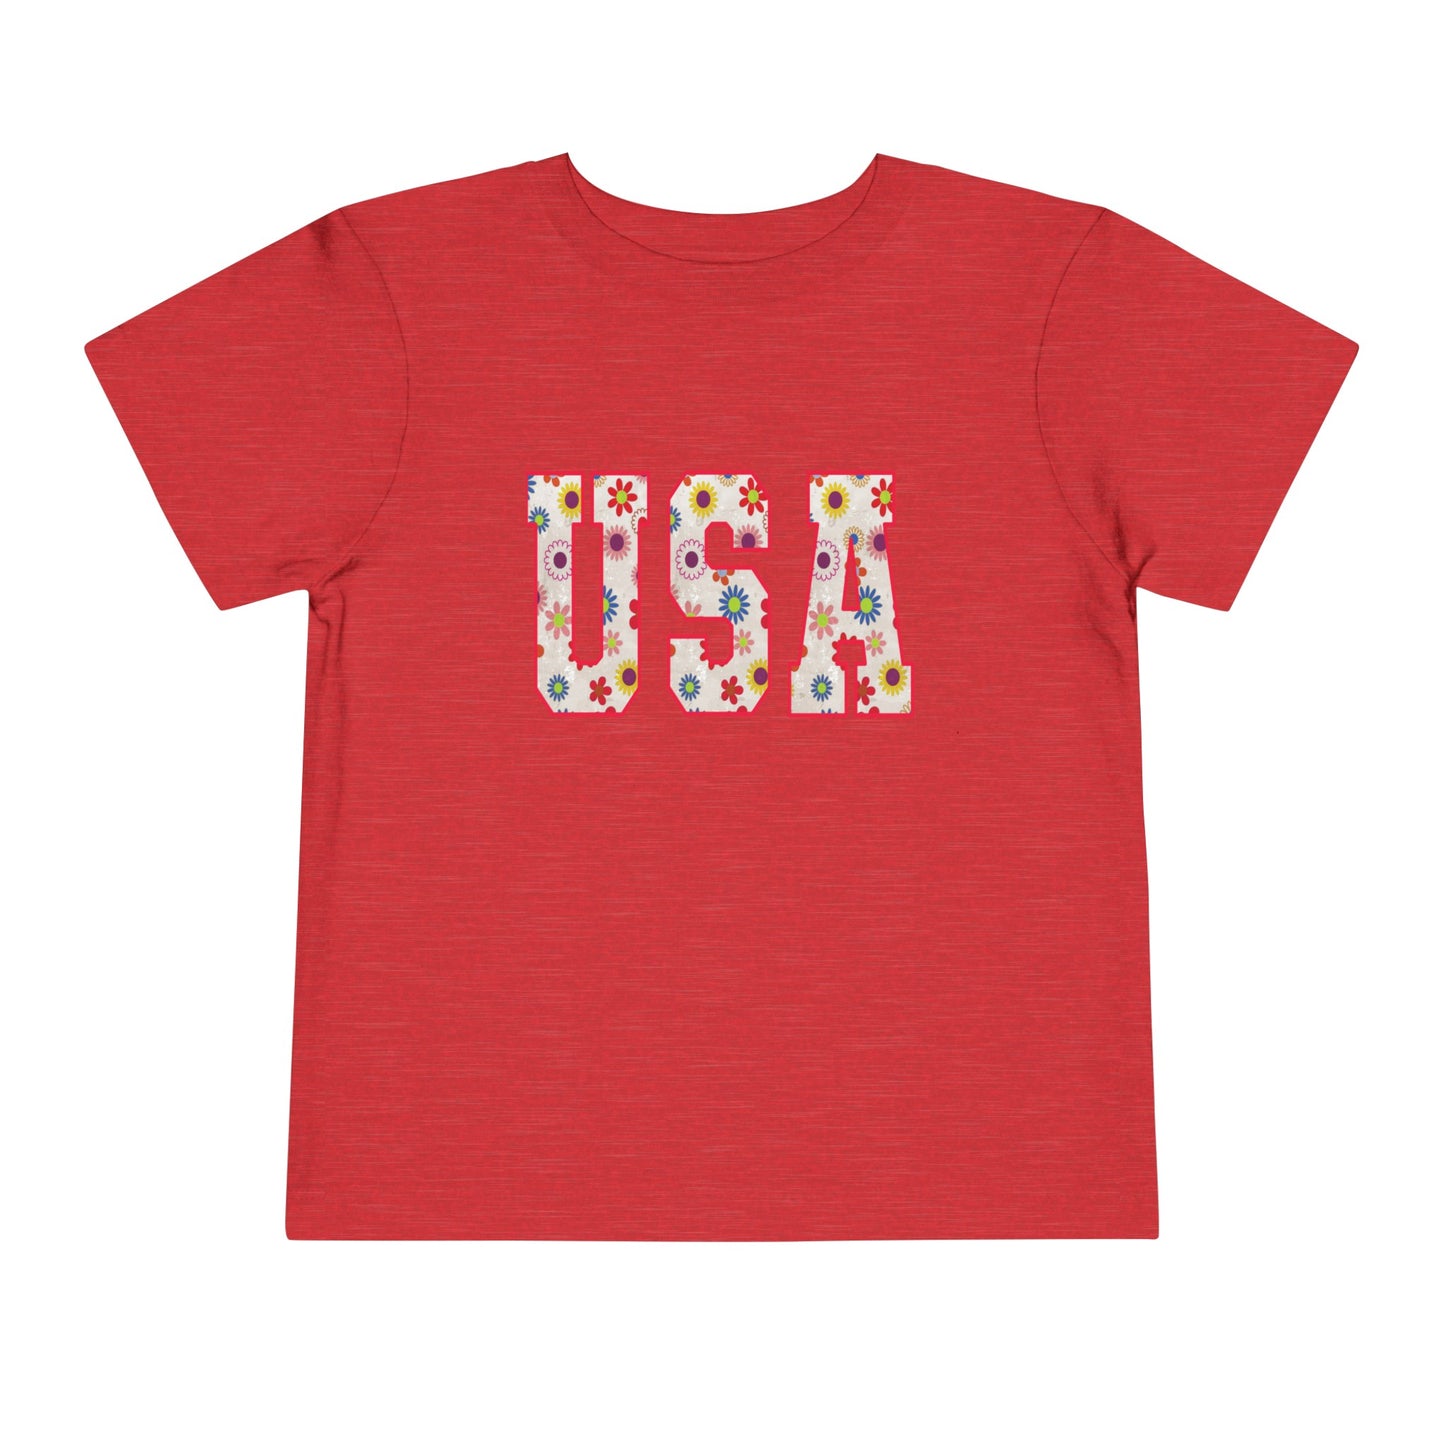 USA Floral 4th of July Toddler Short Sleeve Tee